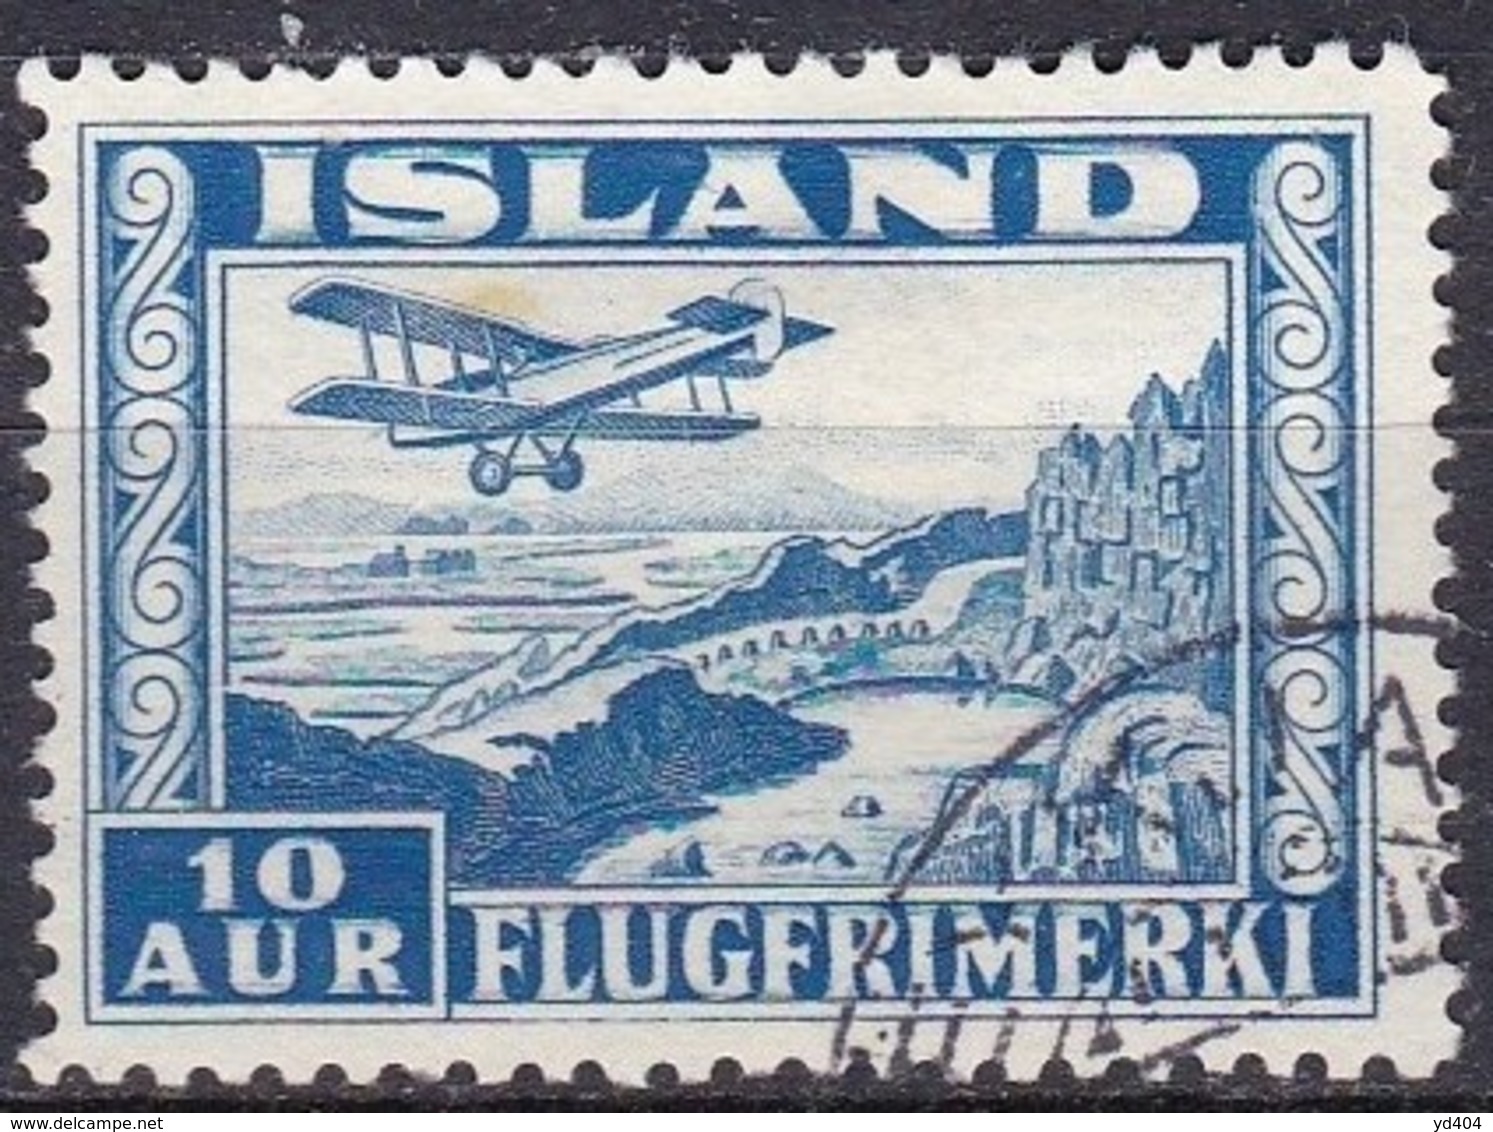 IS322 – ISLANDE – ICELAND – 1934 – PLANE OVER THINGVALLA – SC # C15 USED - Luchtpost